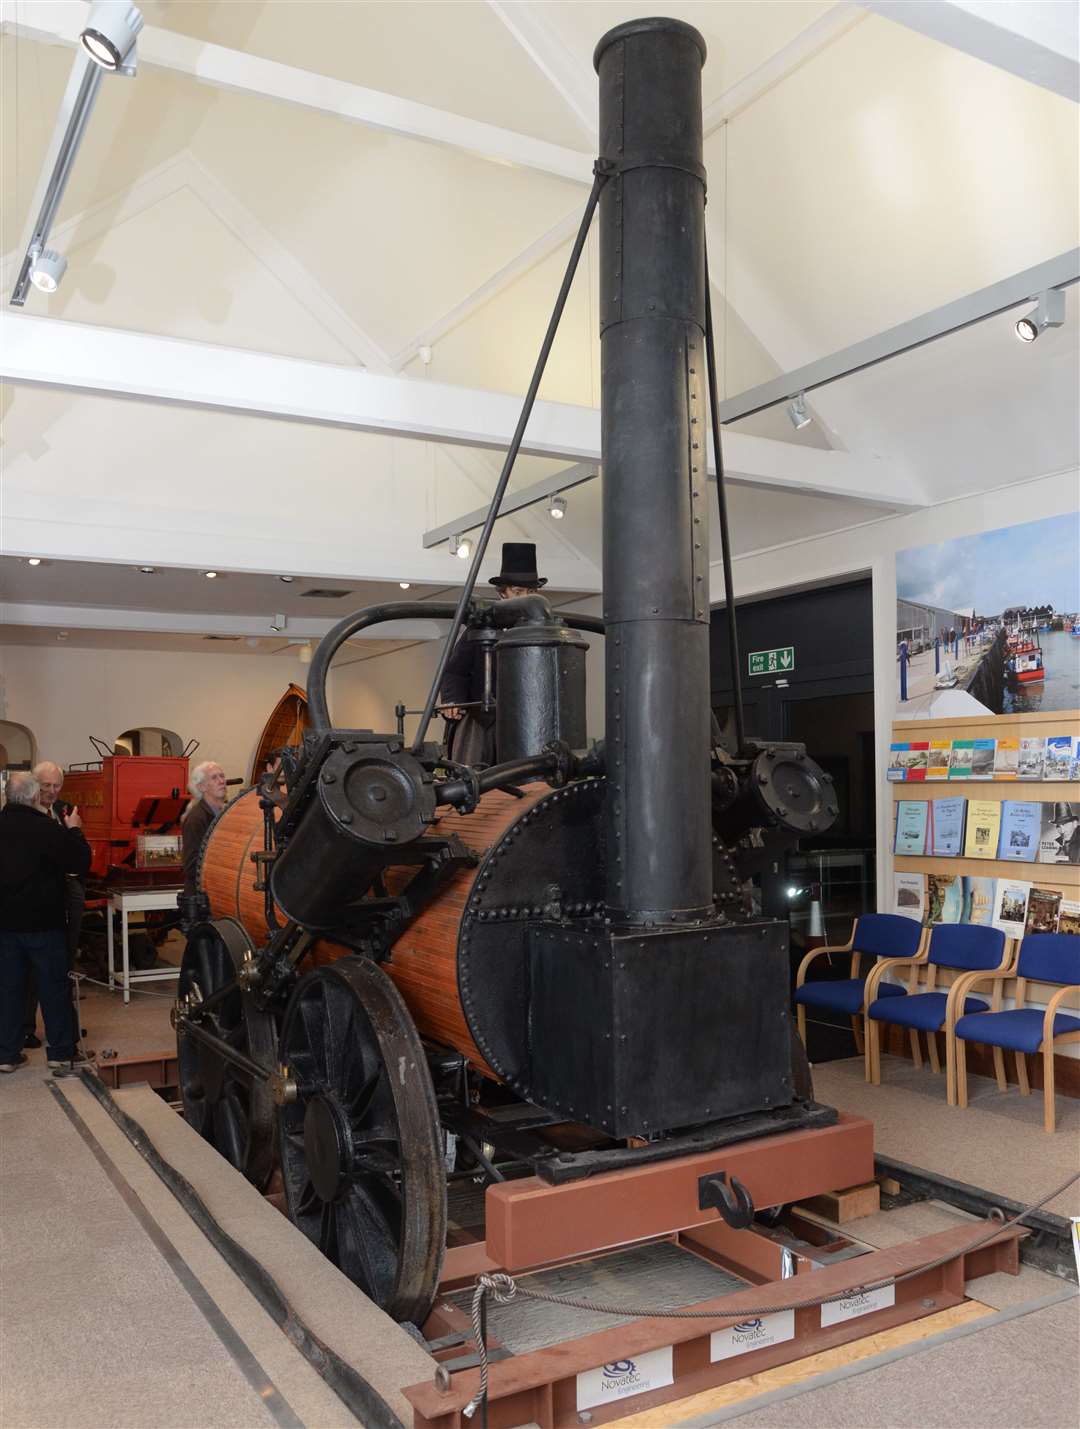 The Invicta locomotive on display at the Whitstable Community Museum and Gallery Picture: Chris Davey